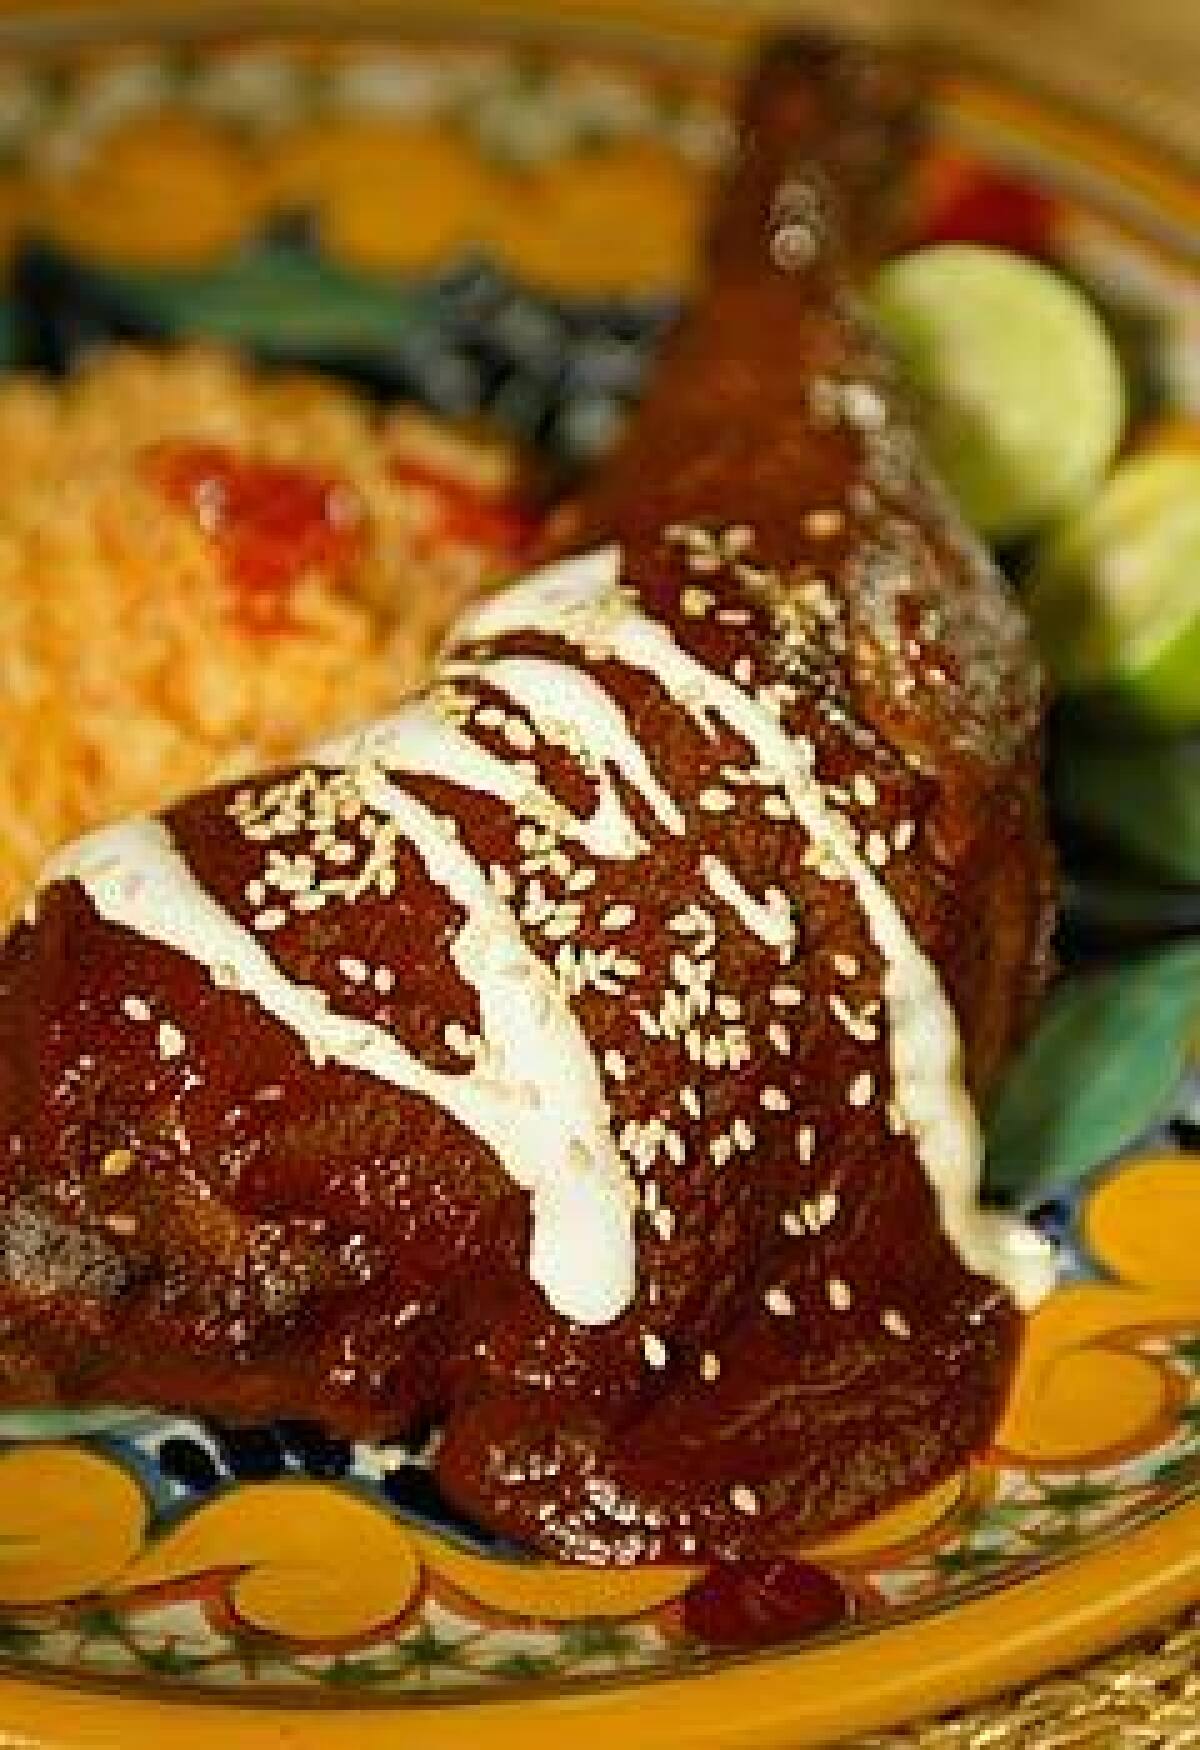 The classic mole poblano is made with turkey, shown here garnished with sesame seeds and Mexican crema.